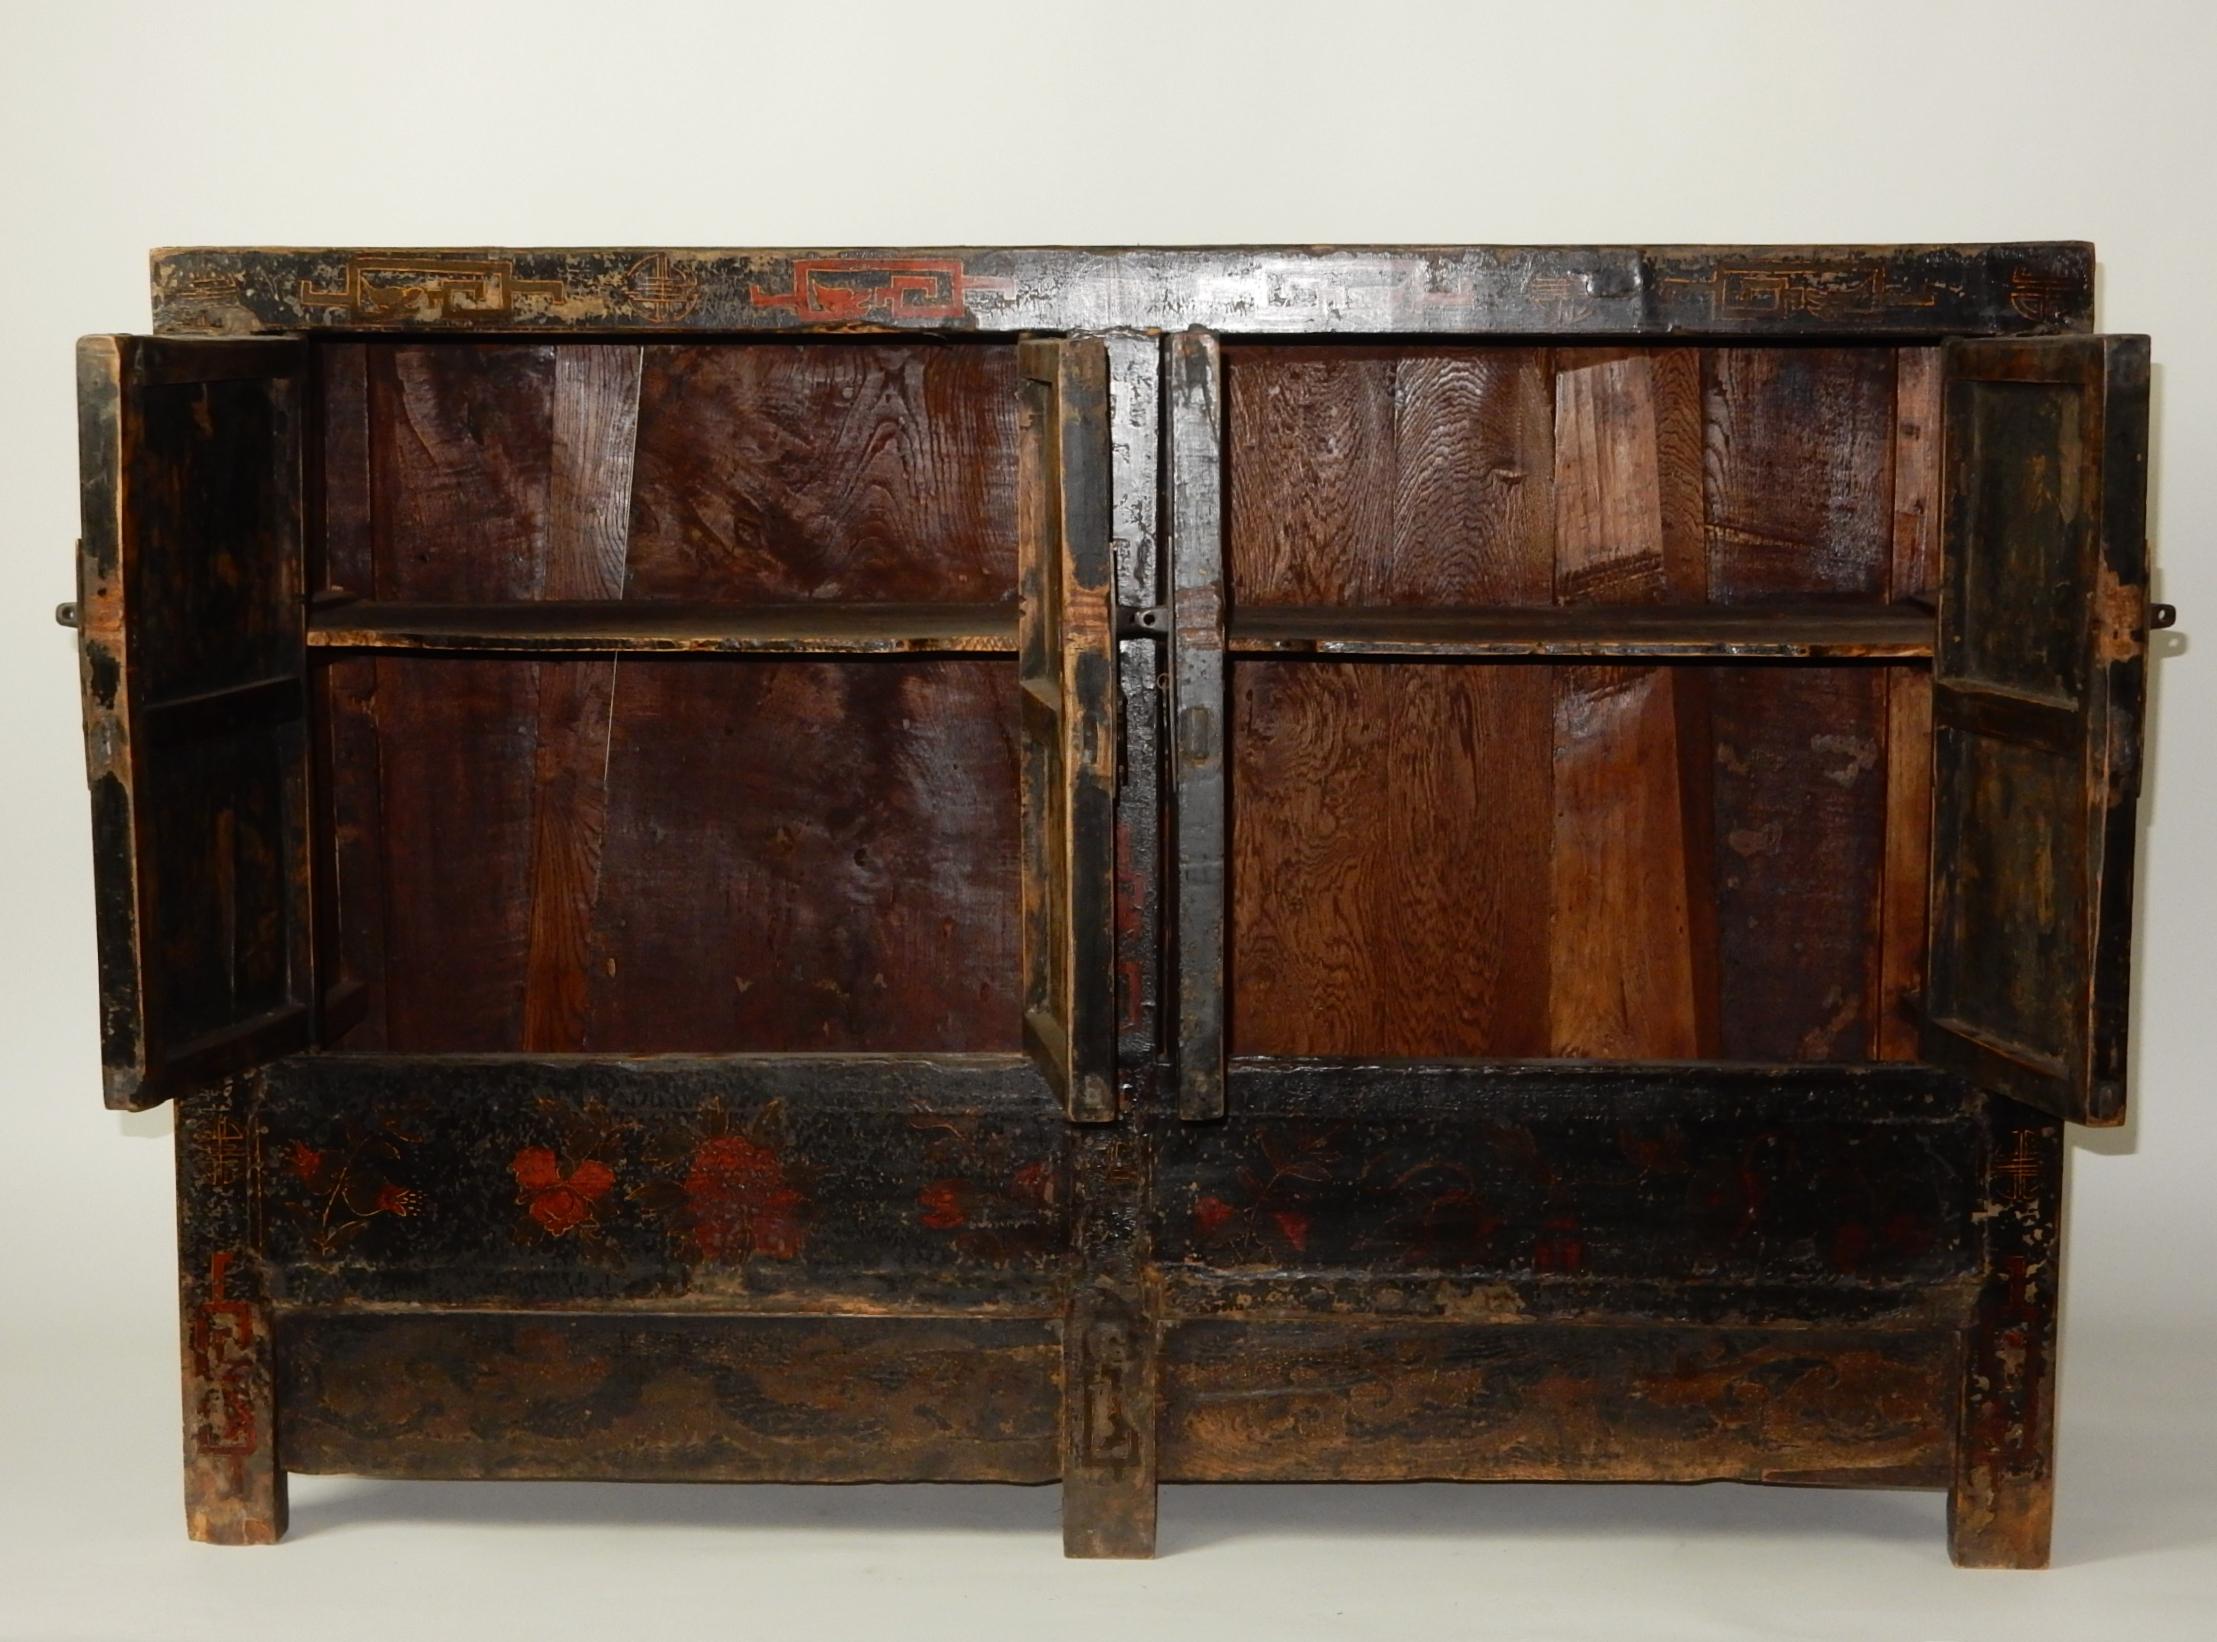 Hardwood Ancient Chinese Apothecary Lacquered Cabinet Sideboard